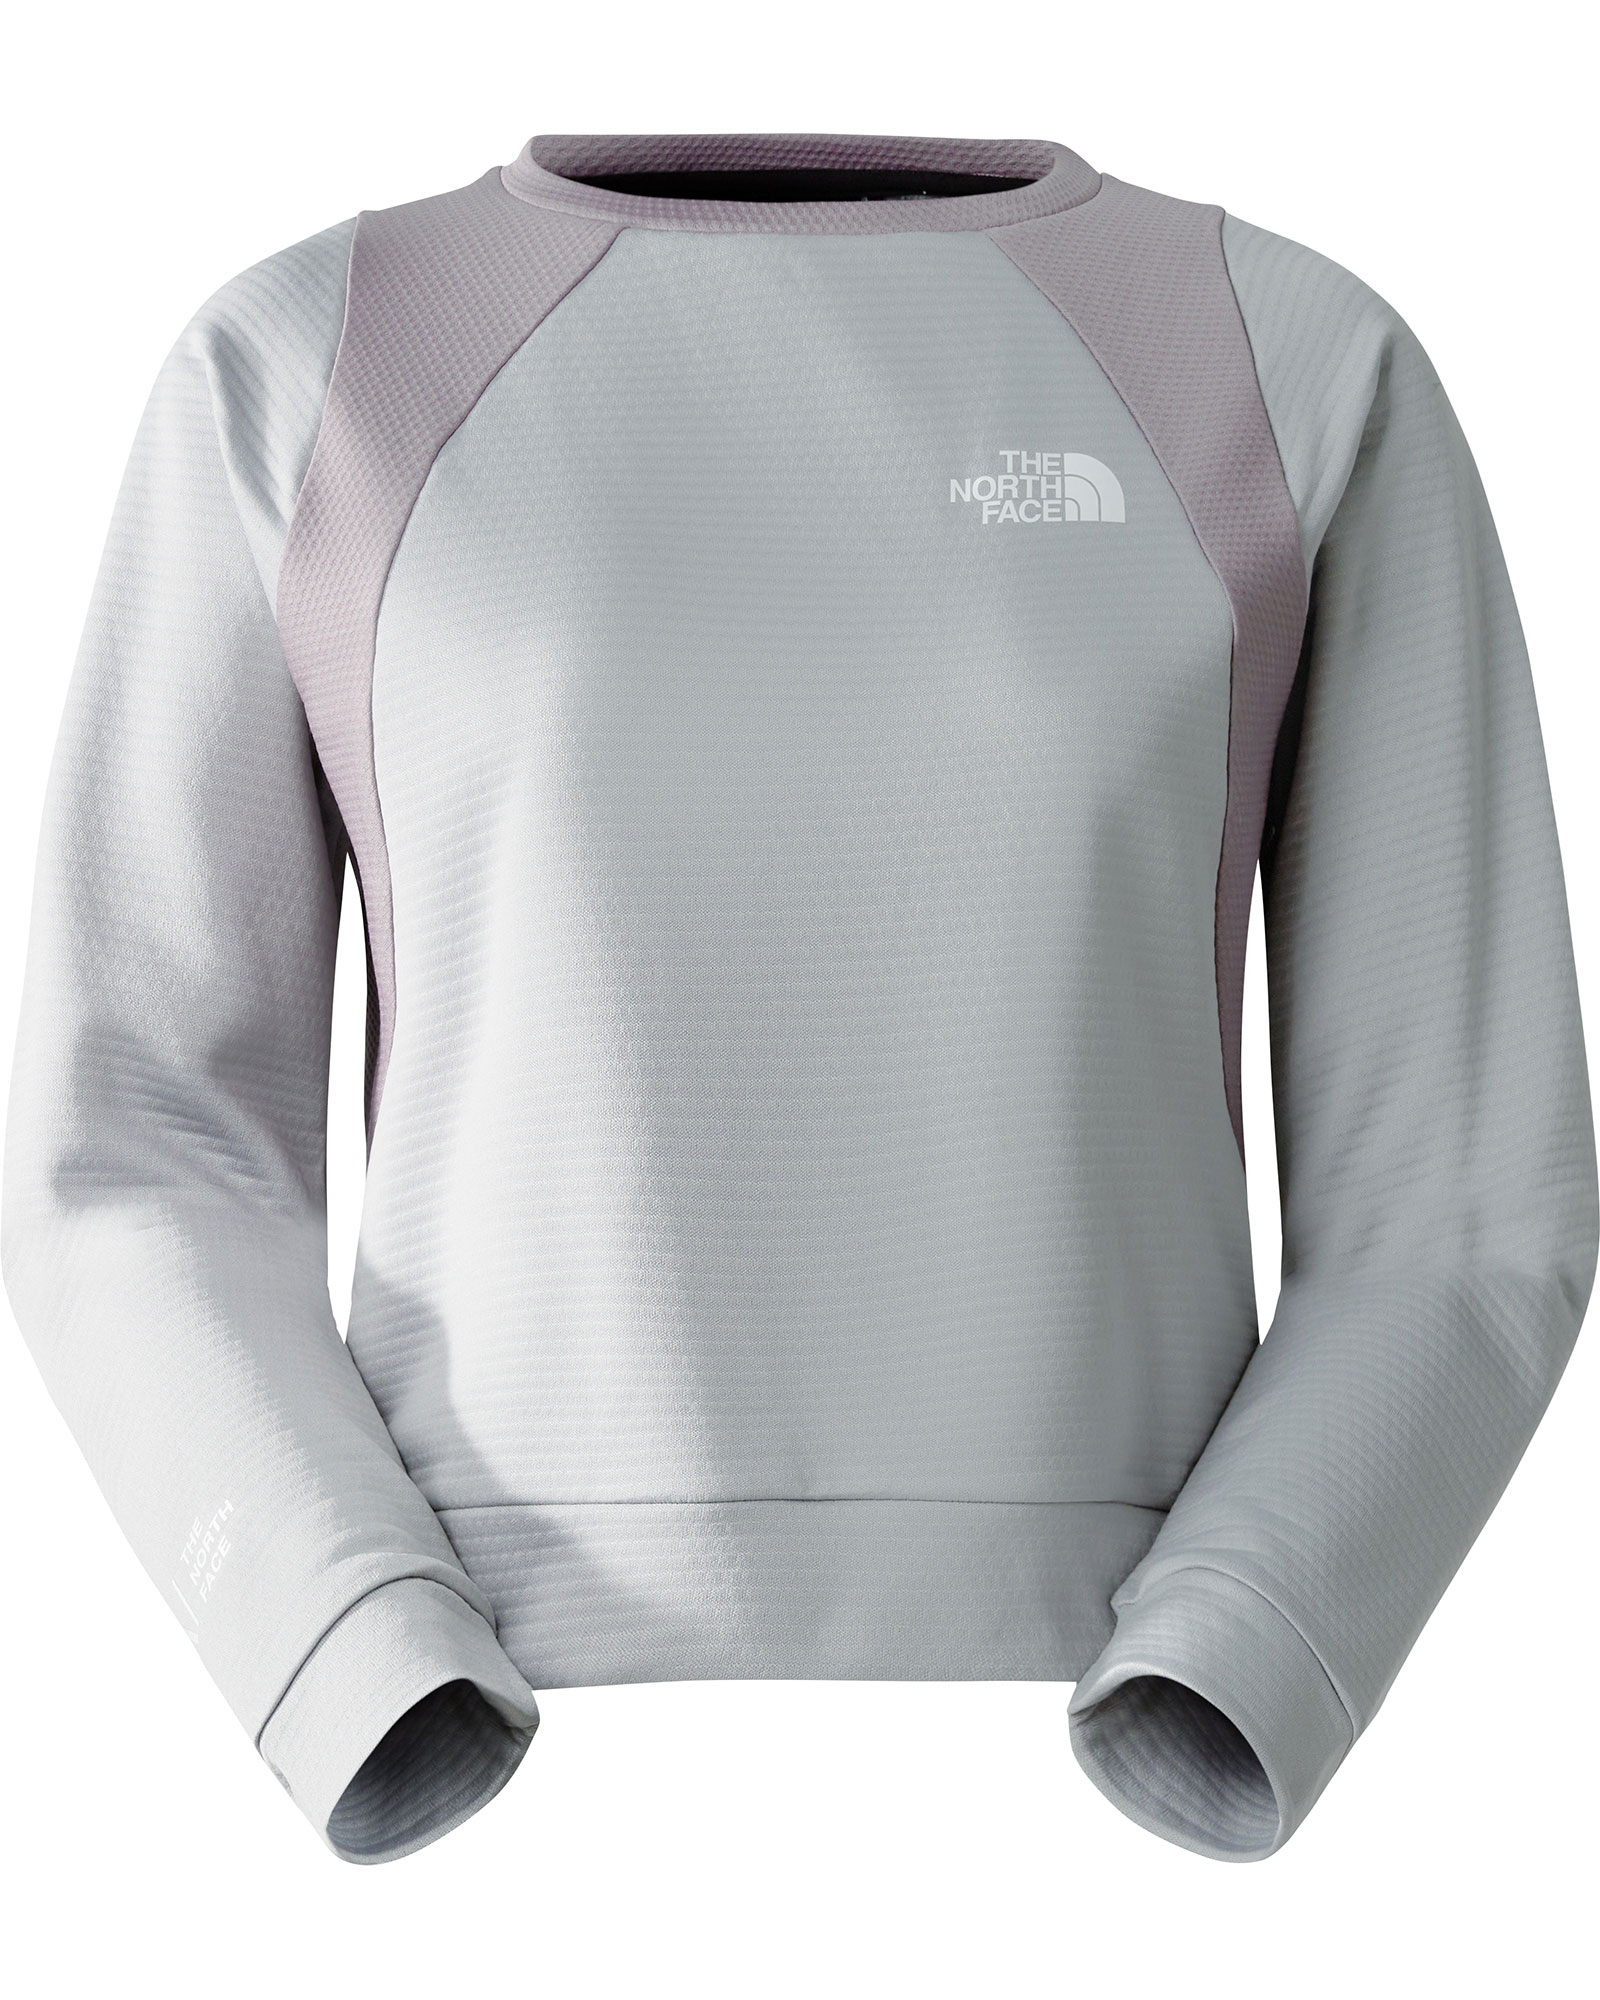 The North Face Women’s MA Crew Neck Fleece - Meld Grey-Fawn Grey L